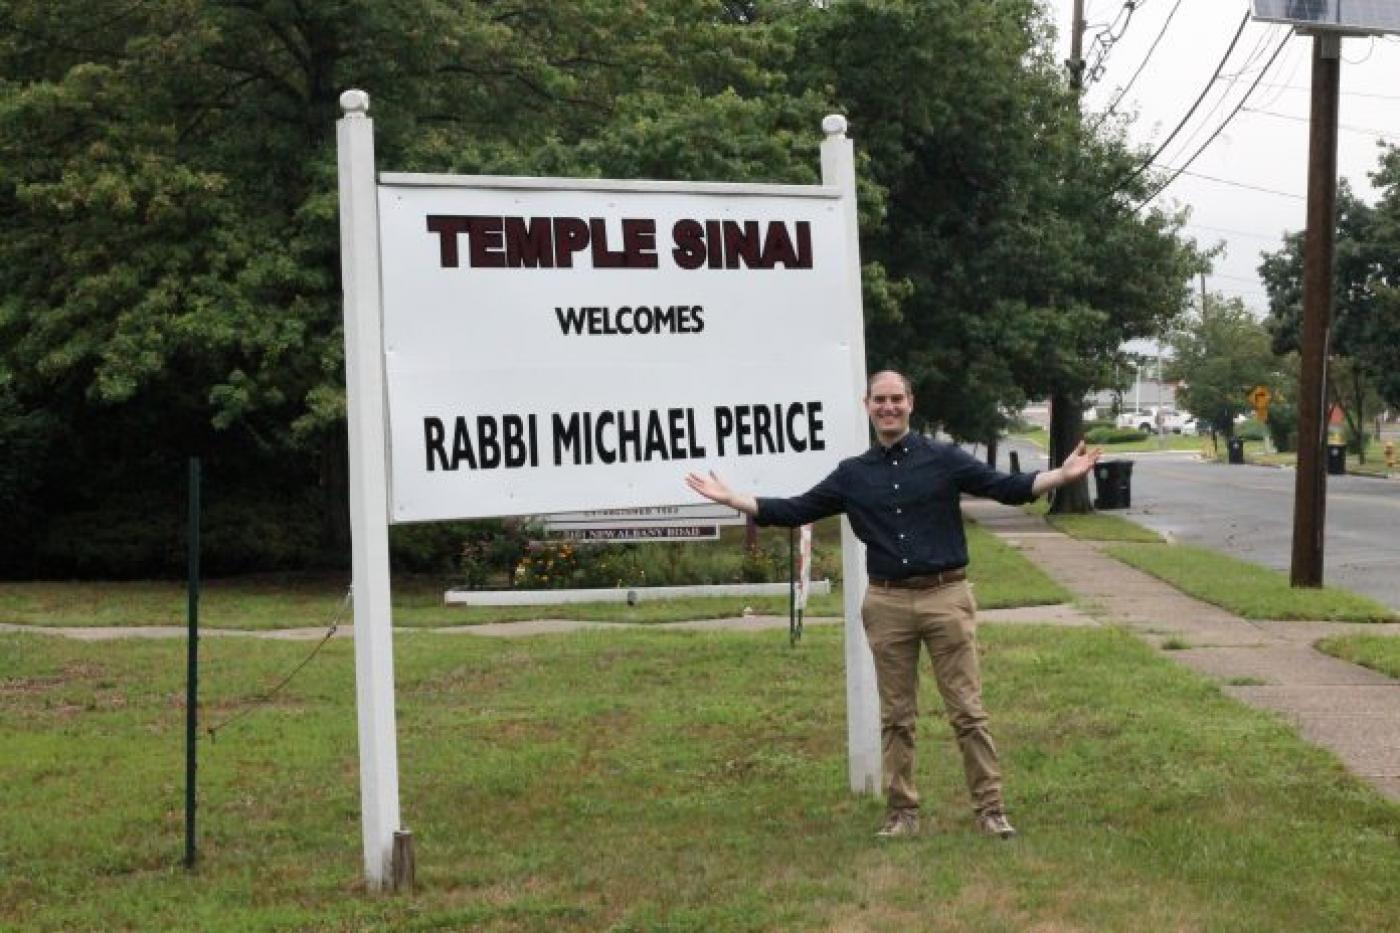 Rabbi Michael Perice stands with the sign his congregation at Temple Sinai installed to welcome him. Perice, the synagogue’s newest rabbi, started his new position July 1.